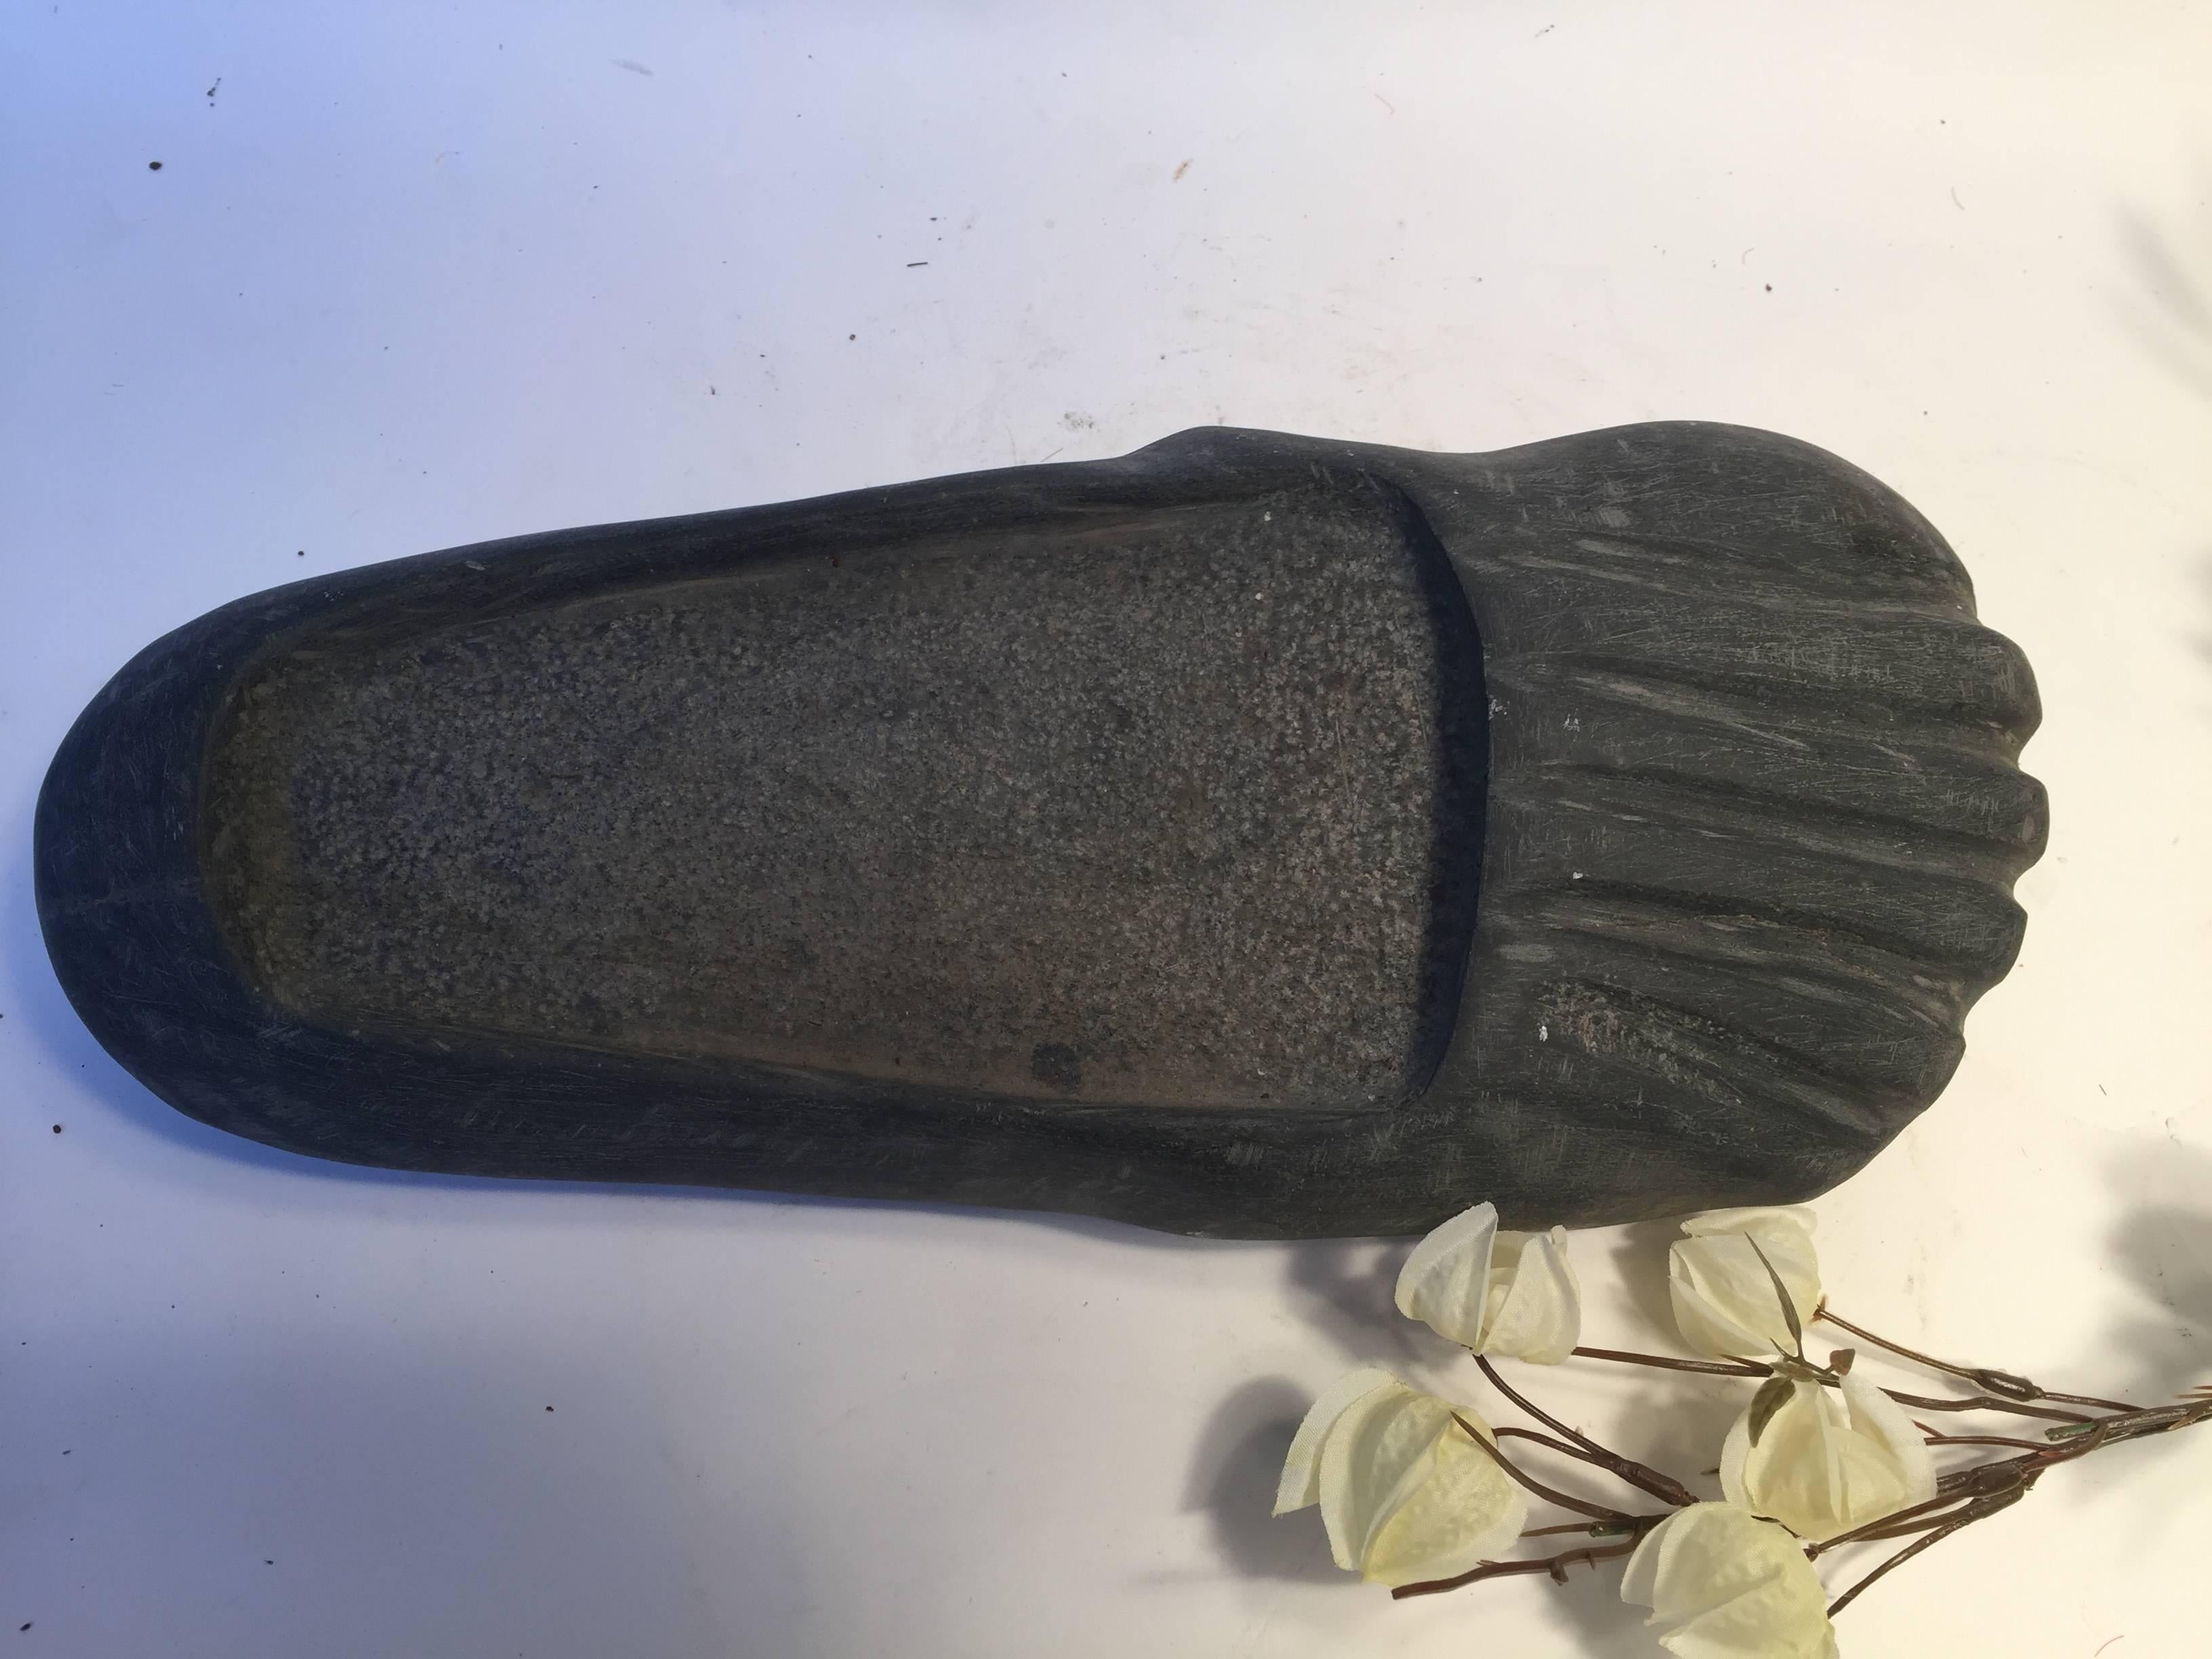 This is a beautiful and novel little treasure carved in stone. This Buddha foot carving in dark limestone was acquired for our private collection in western China some 15 years ago. It was originally carved in China's Chengdu area. 

Our Buddha's